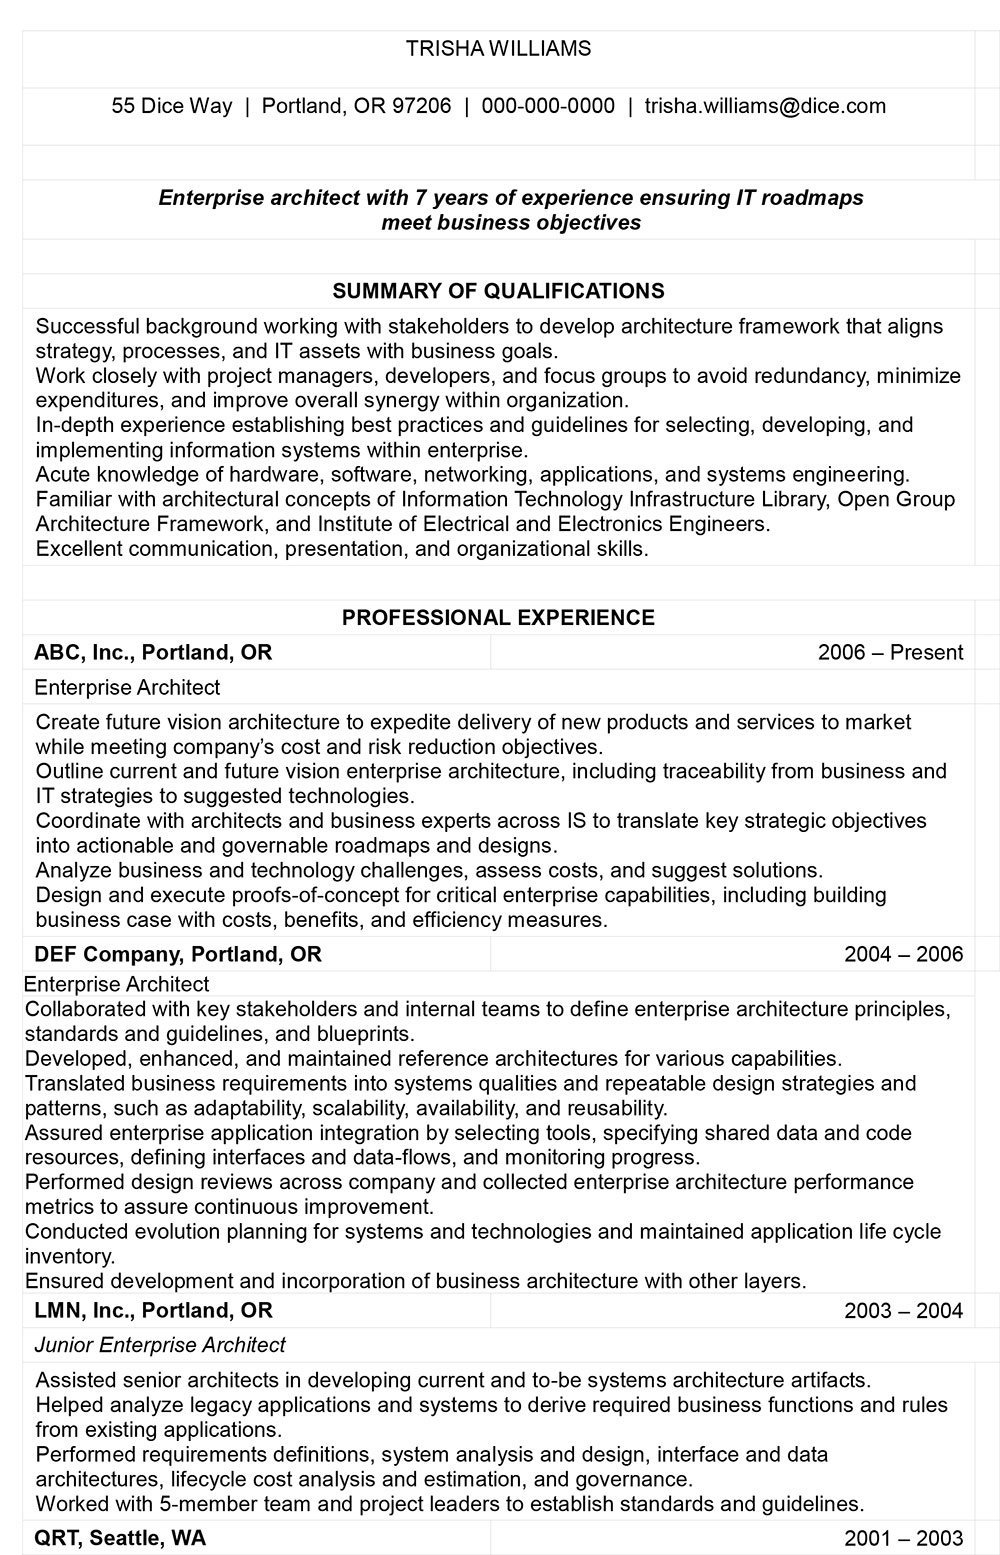 Enterprise-Architecture-Resume-1 The architecture resume that gets you hired (Templates included)